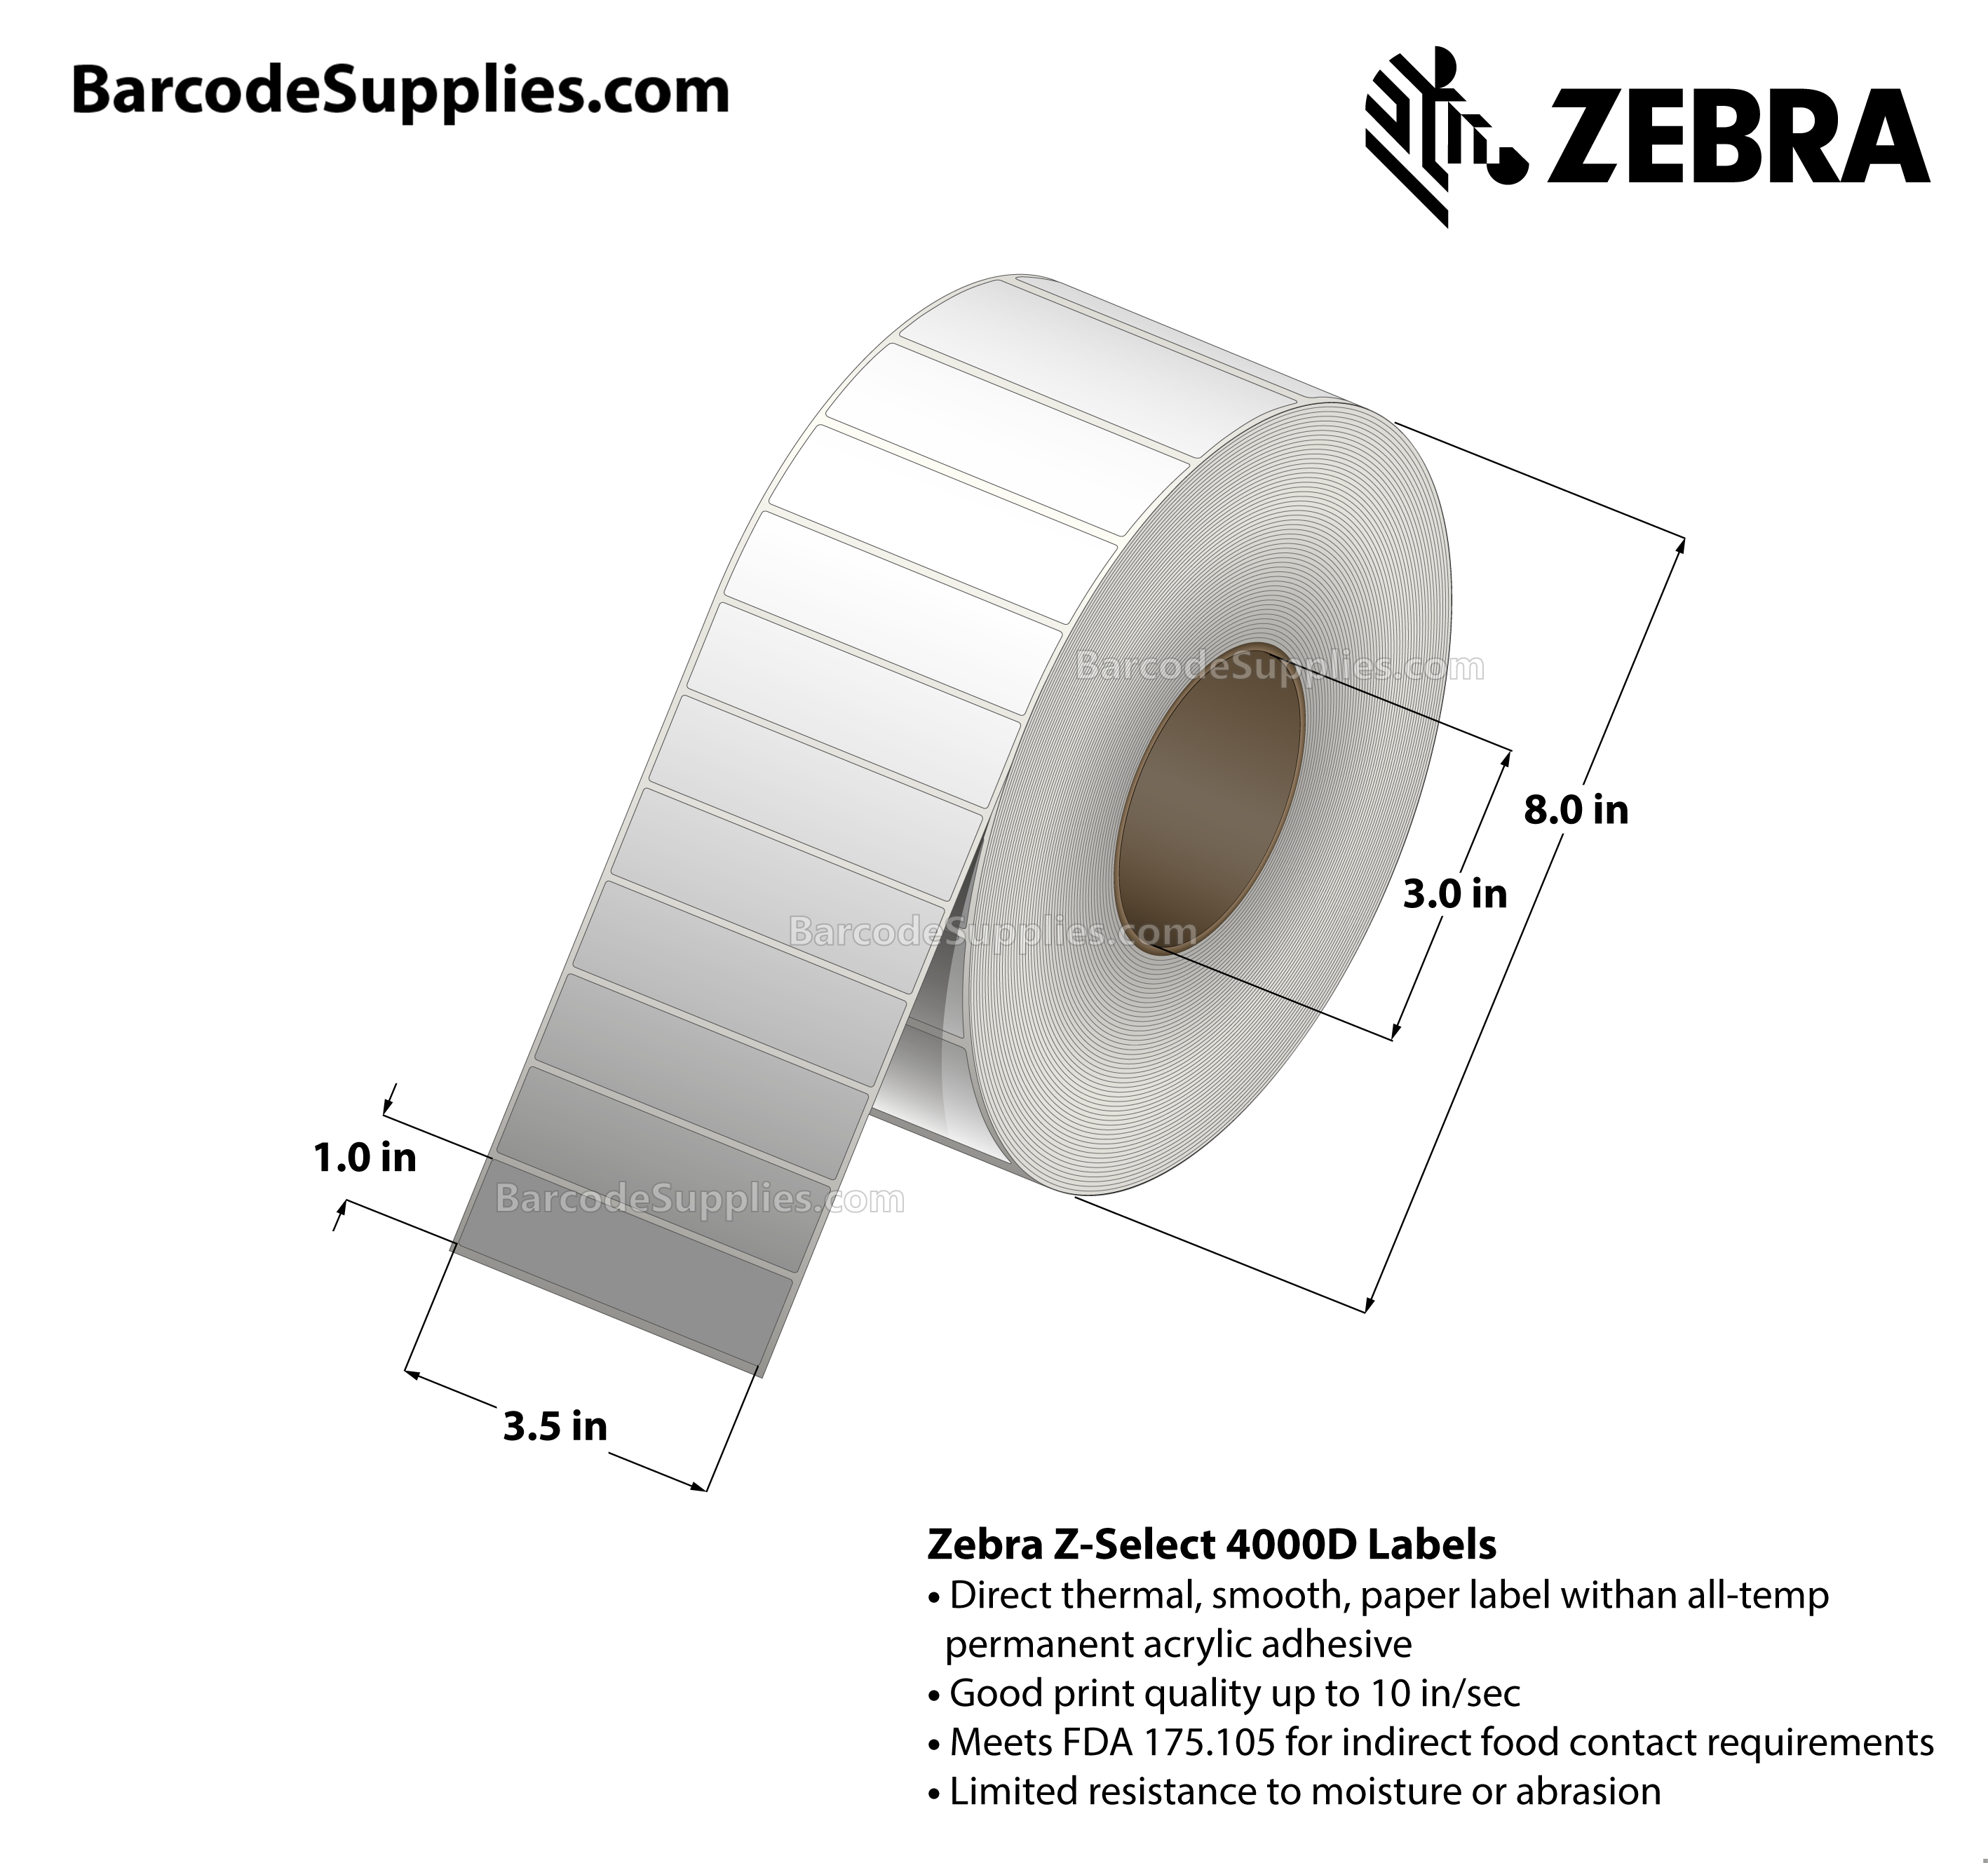 3.5 x 1 Direct Thermal White Z-Select 4000D Labels With All-Temp Adhesive - Not Perforated - 5120 Labels Per Roll - Carton Of 6 Rolls - 30720 Labels Total - MPN: 75856